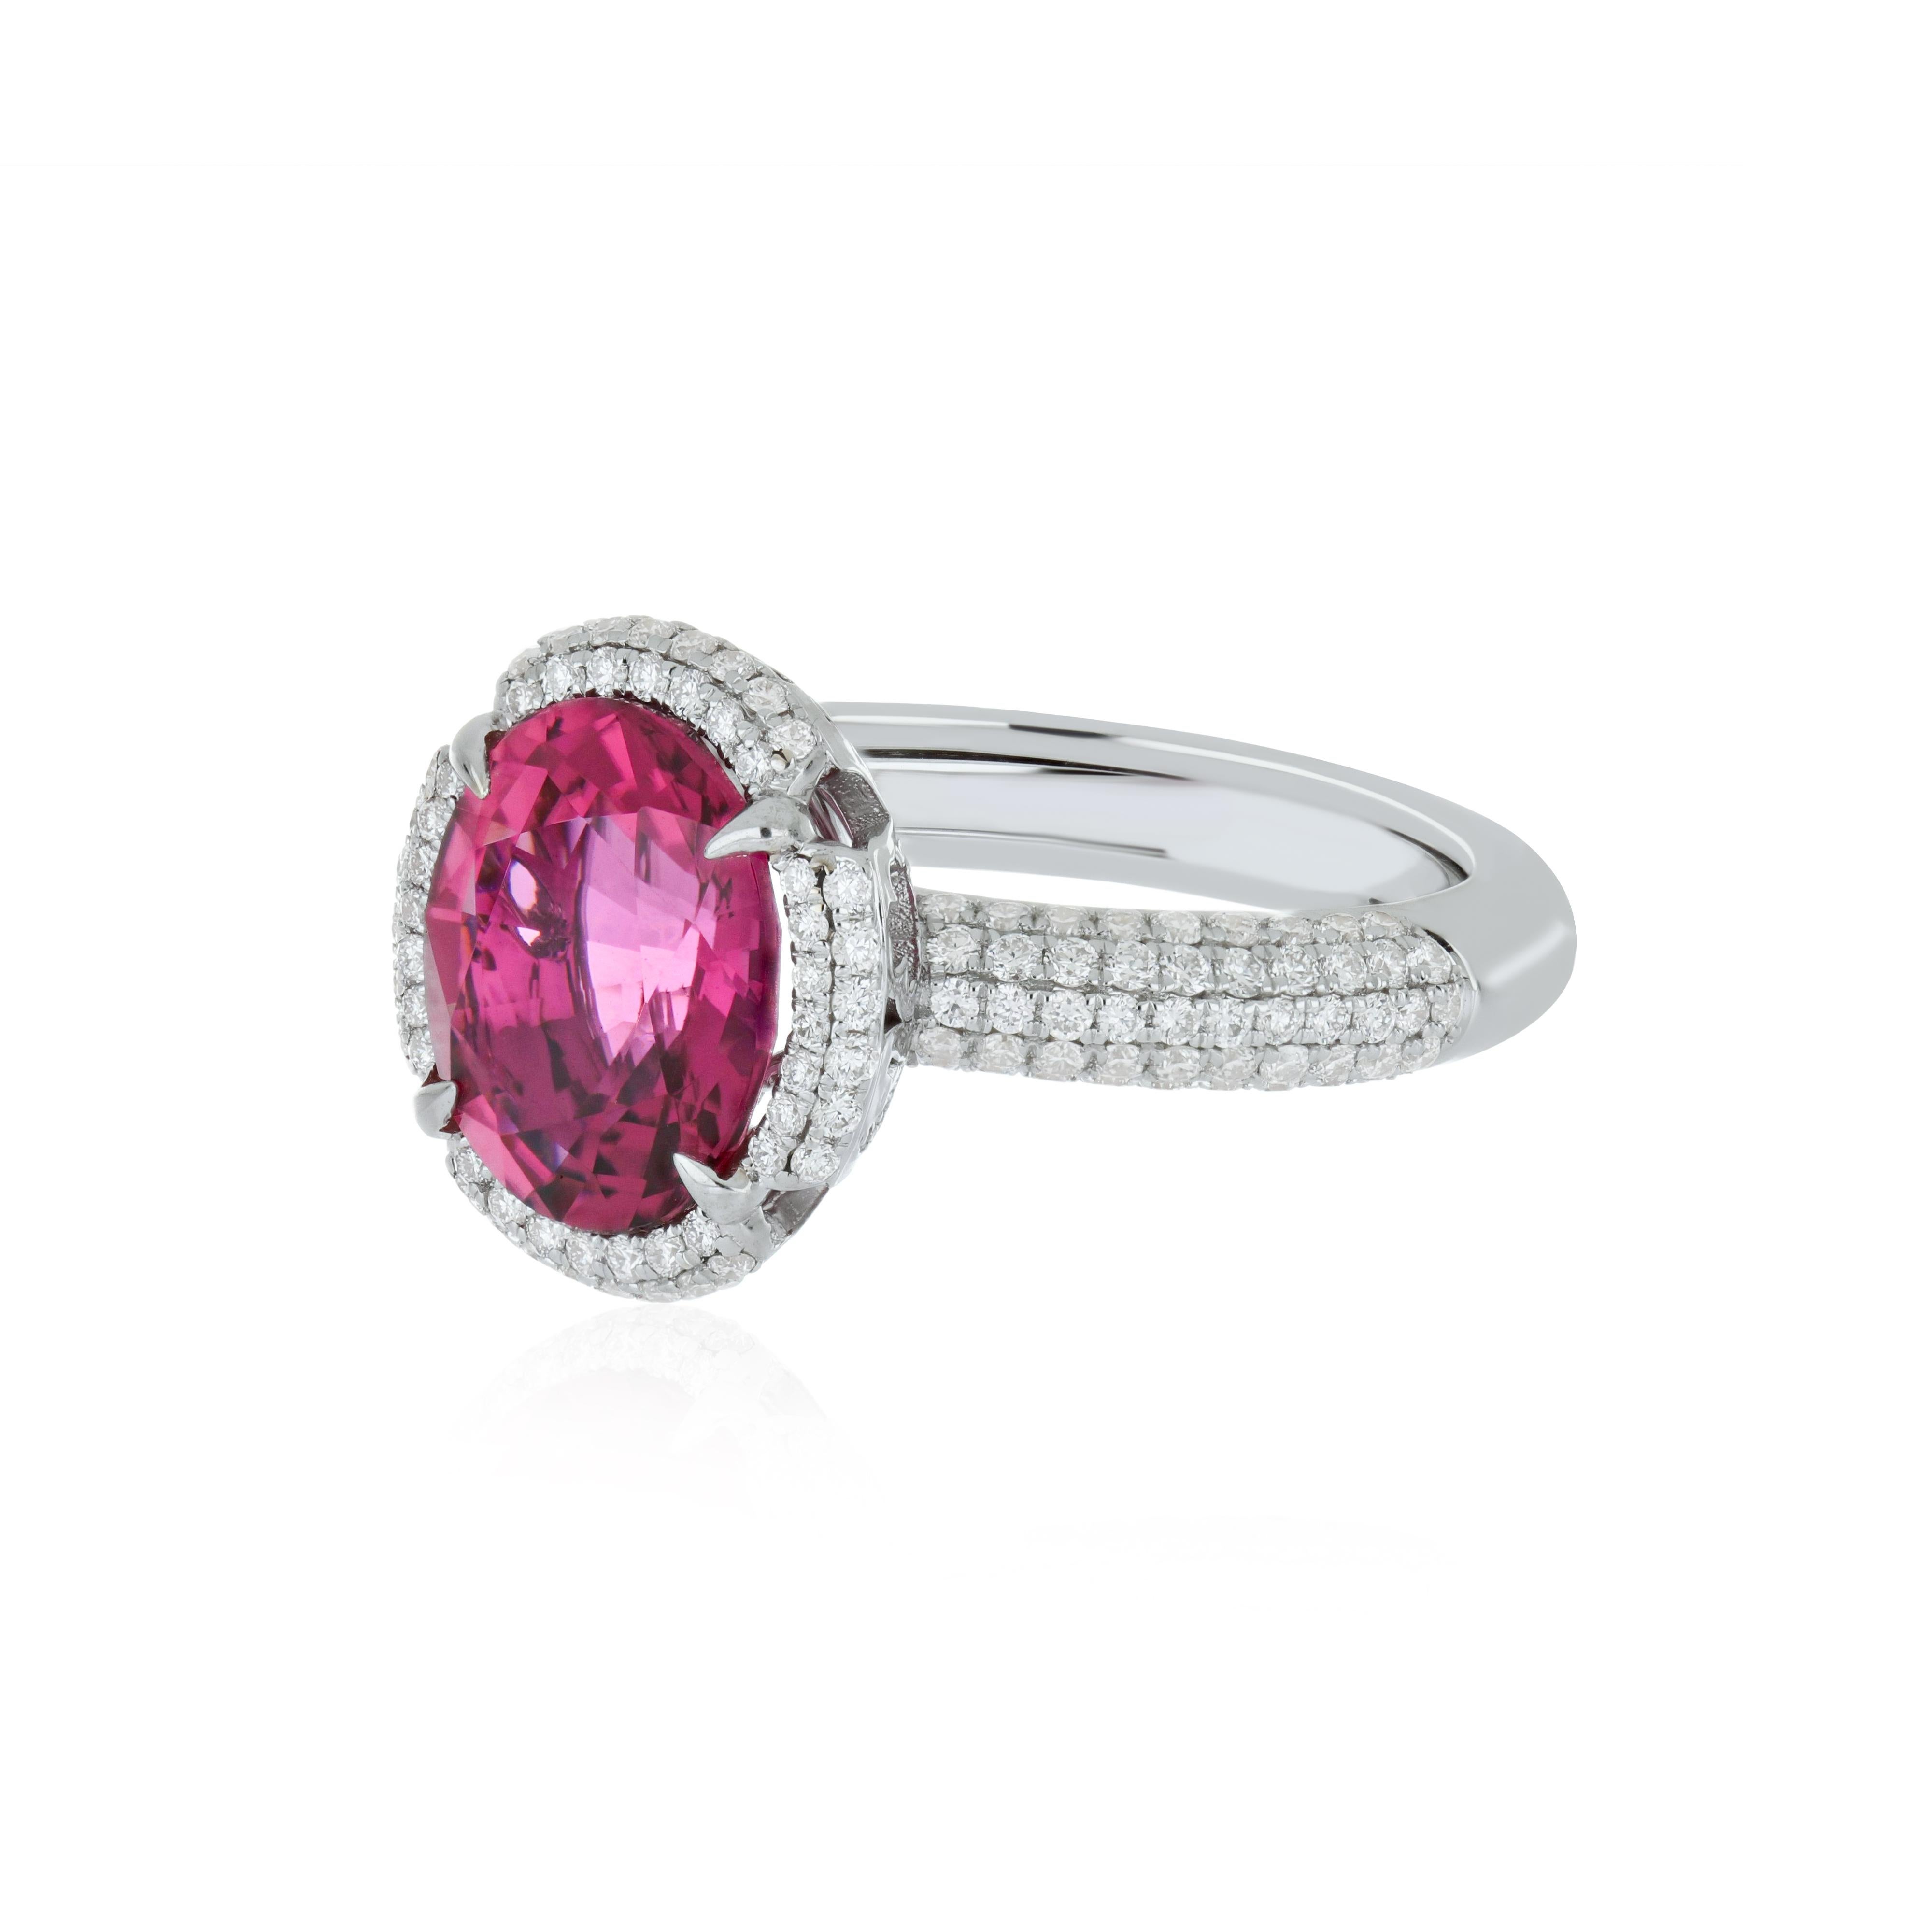 Oval Cut 4.3 Carat Rubellite and Diamond Studded Ring in 18K White Gold Ring For Sale